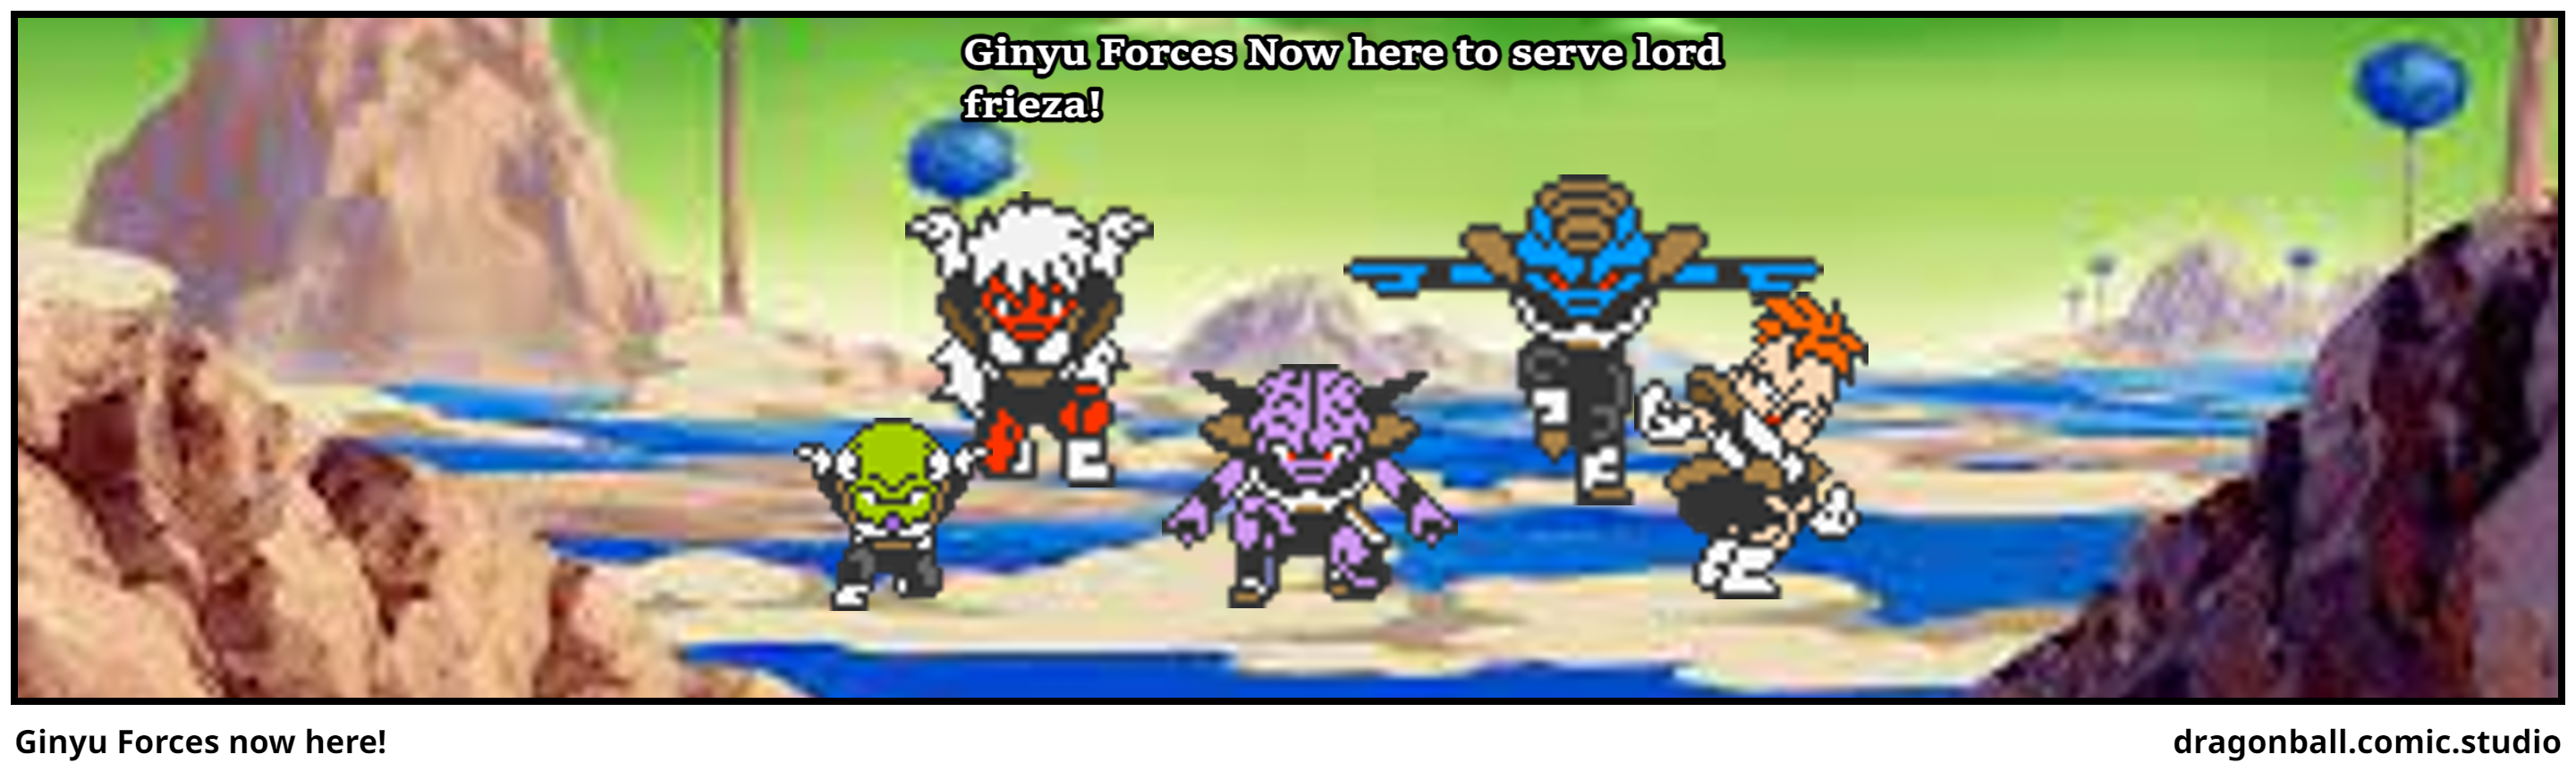 Ginyu Forces now here!